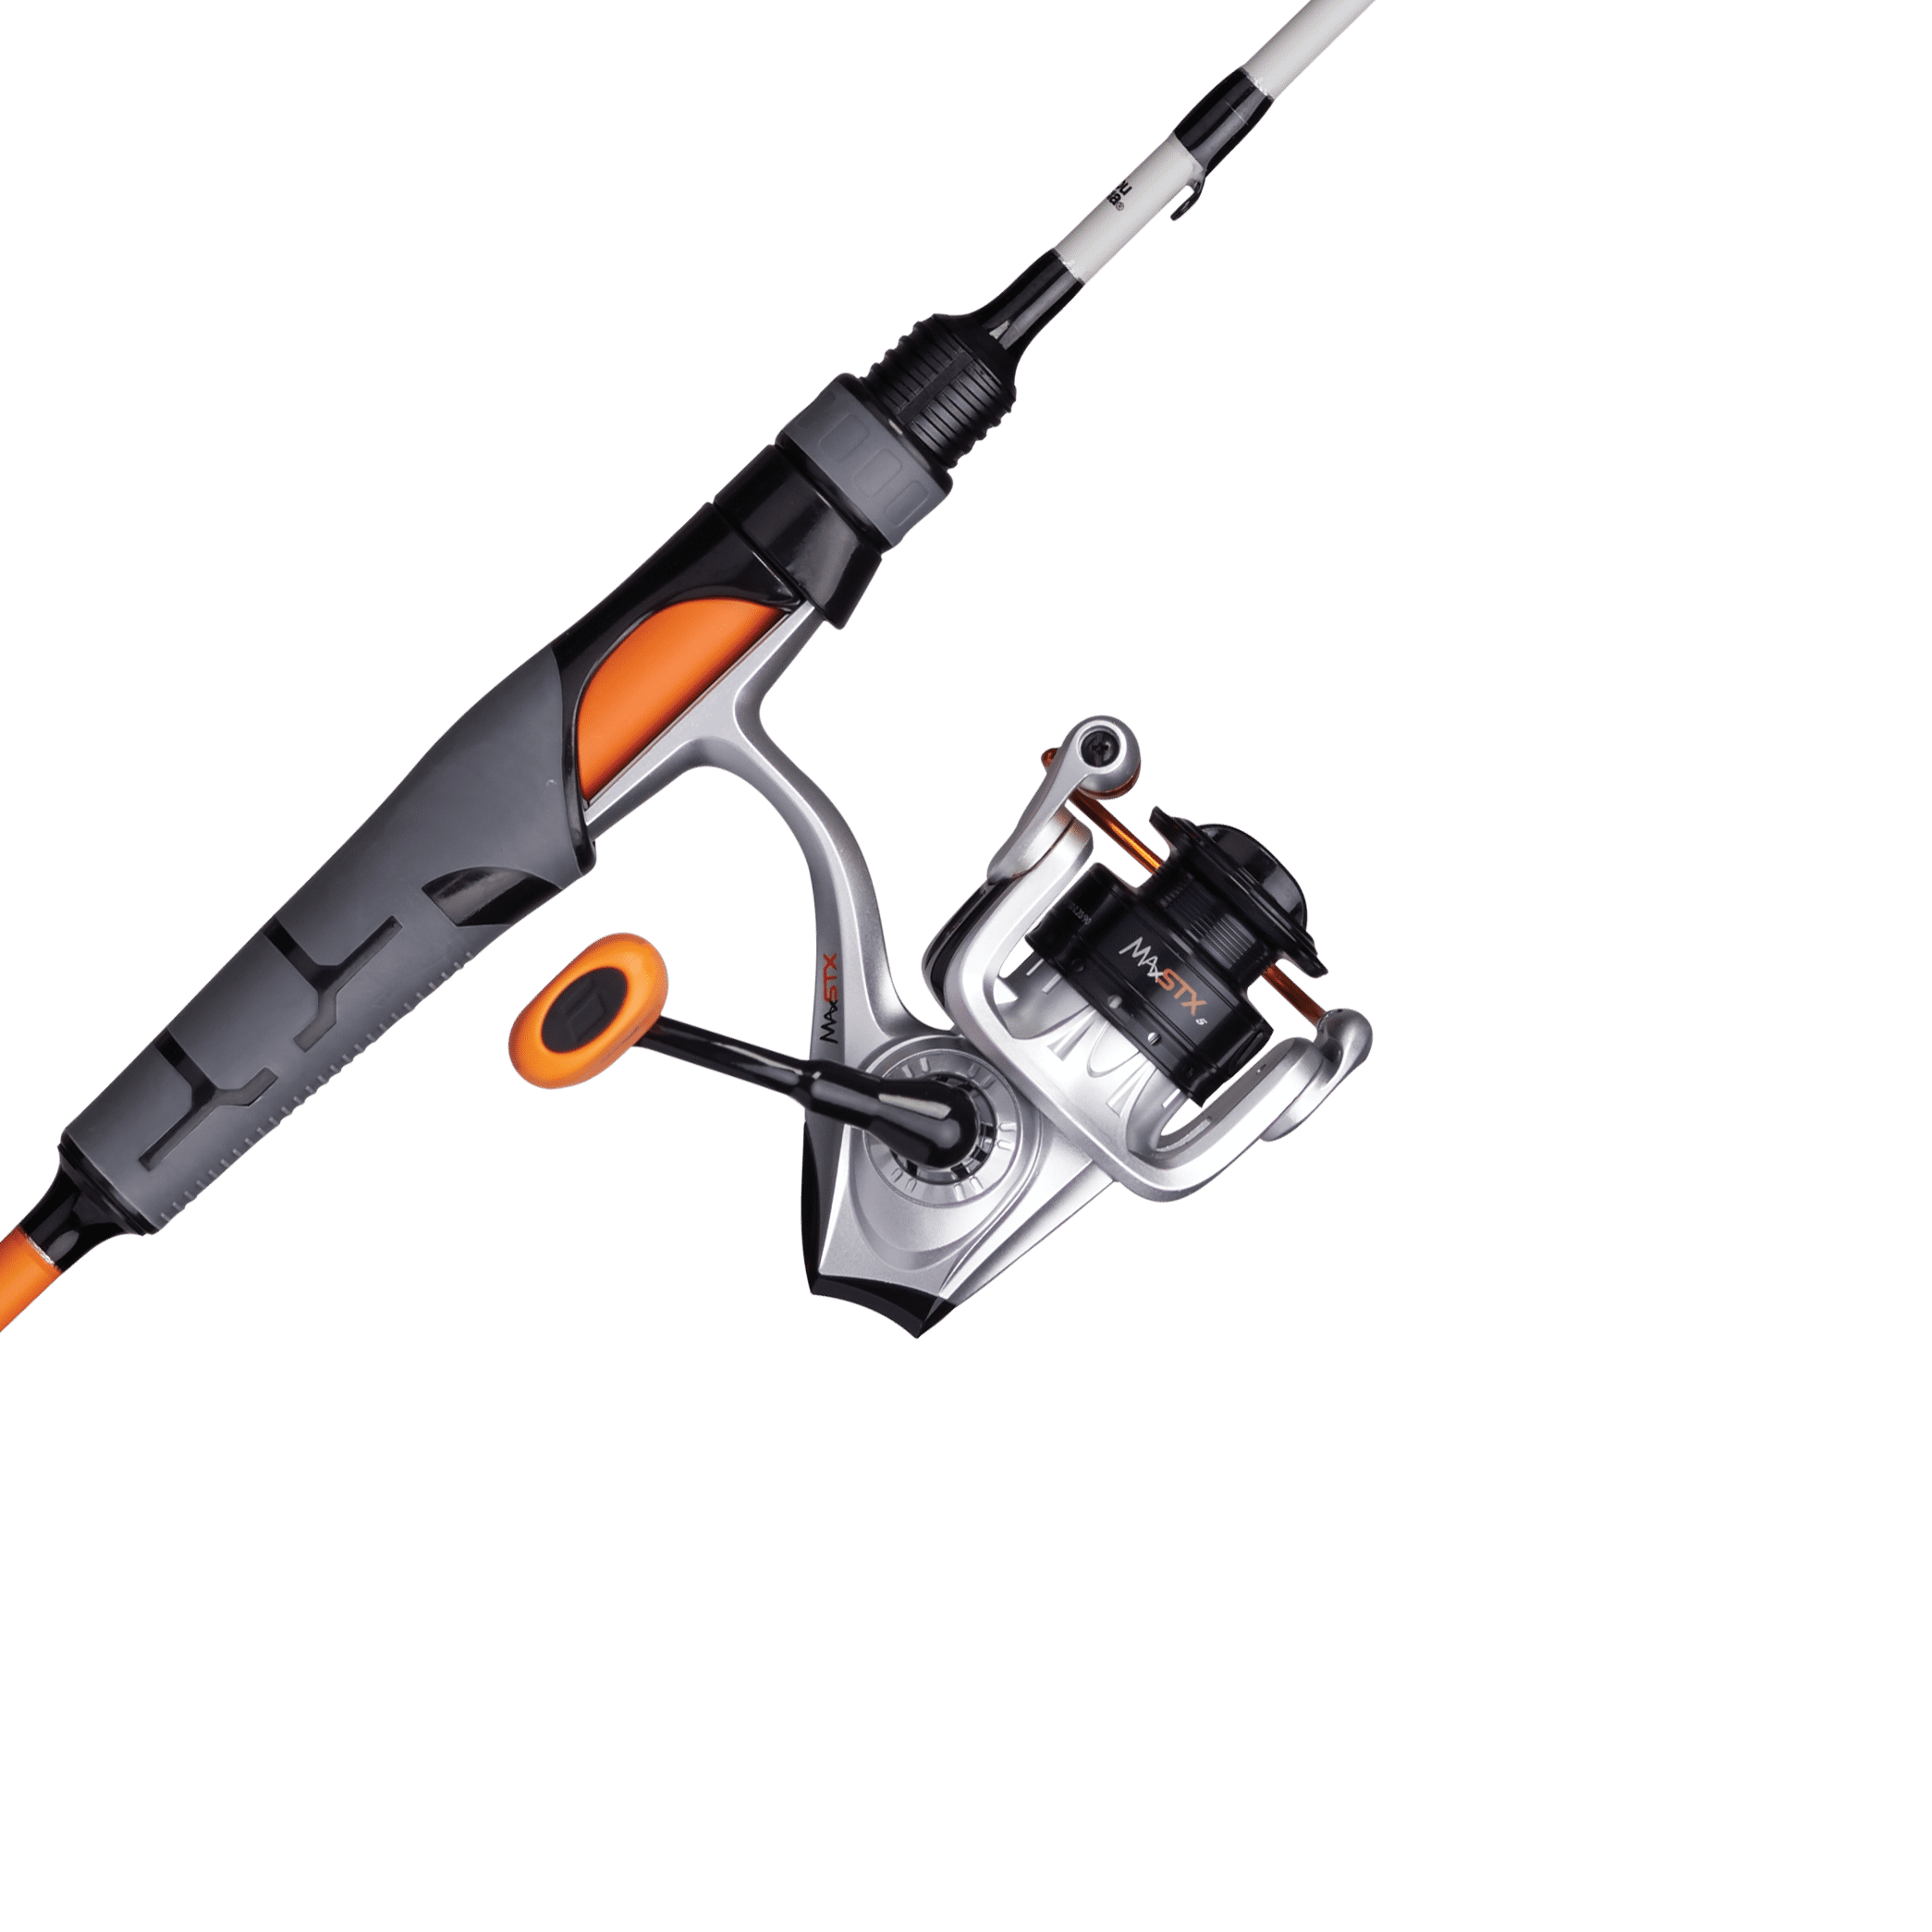 Fishing Rods Combo, 70.87/82.68inch Carbon Fiber Spinning Rod And 2000~4000  Series Spinning Reel, Max Drag 10Kg For Bass Pike Fishing